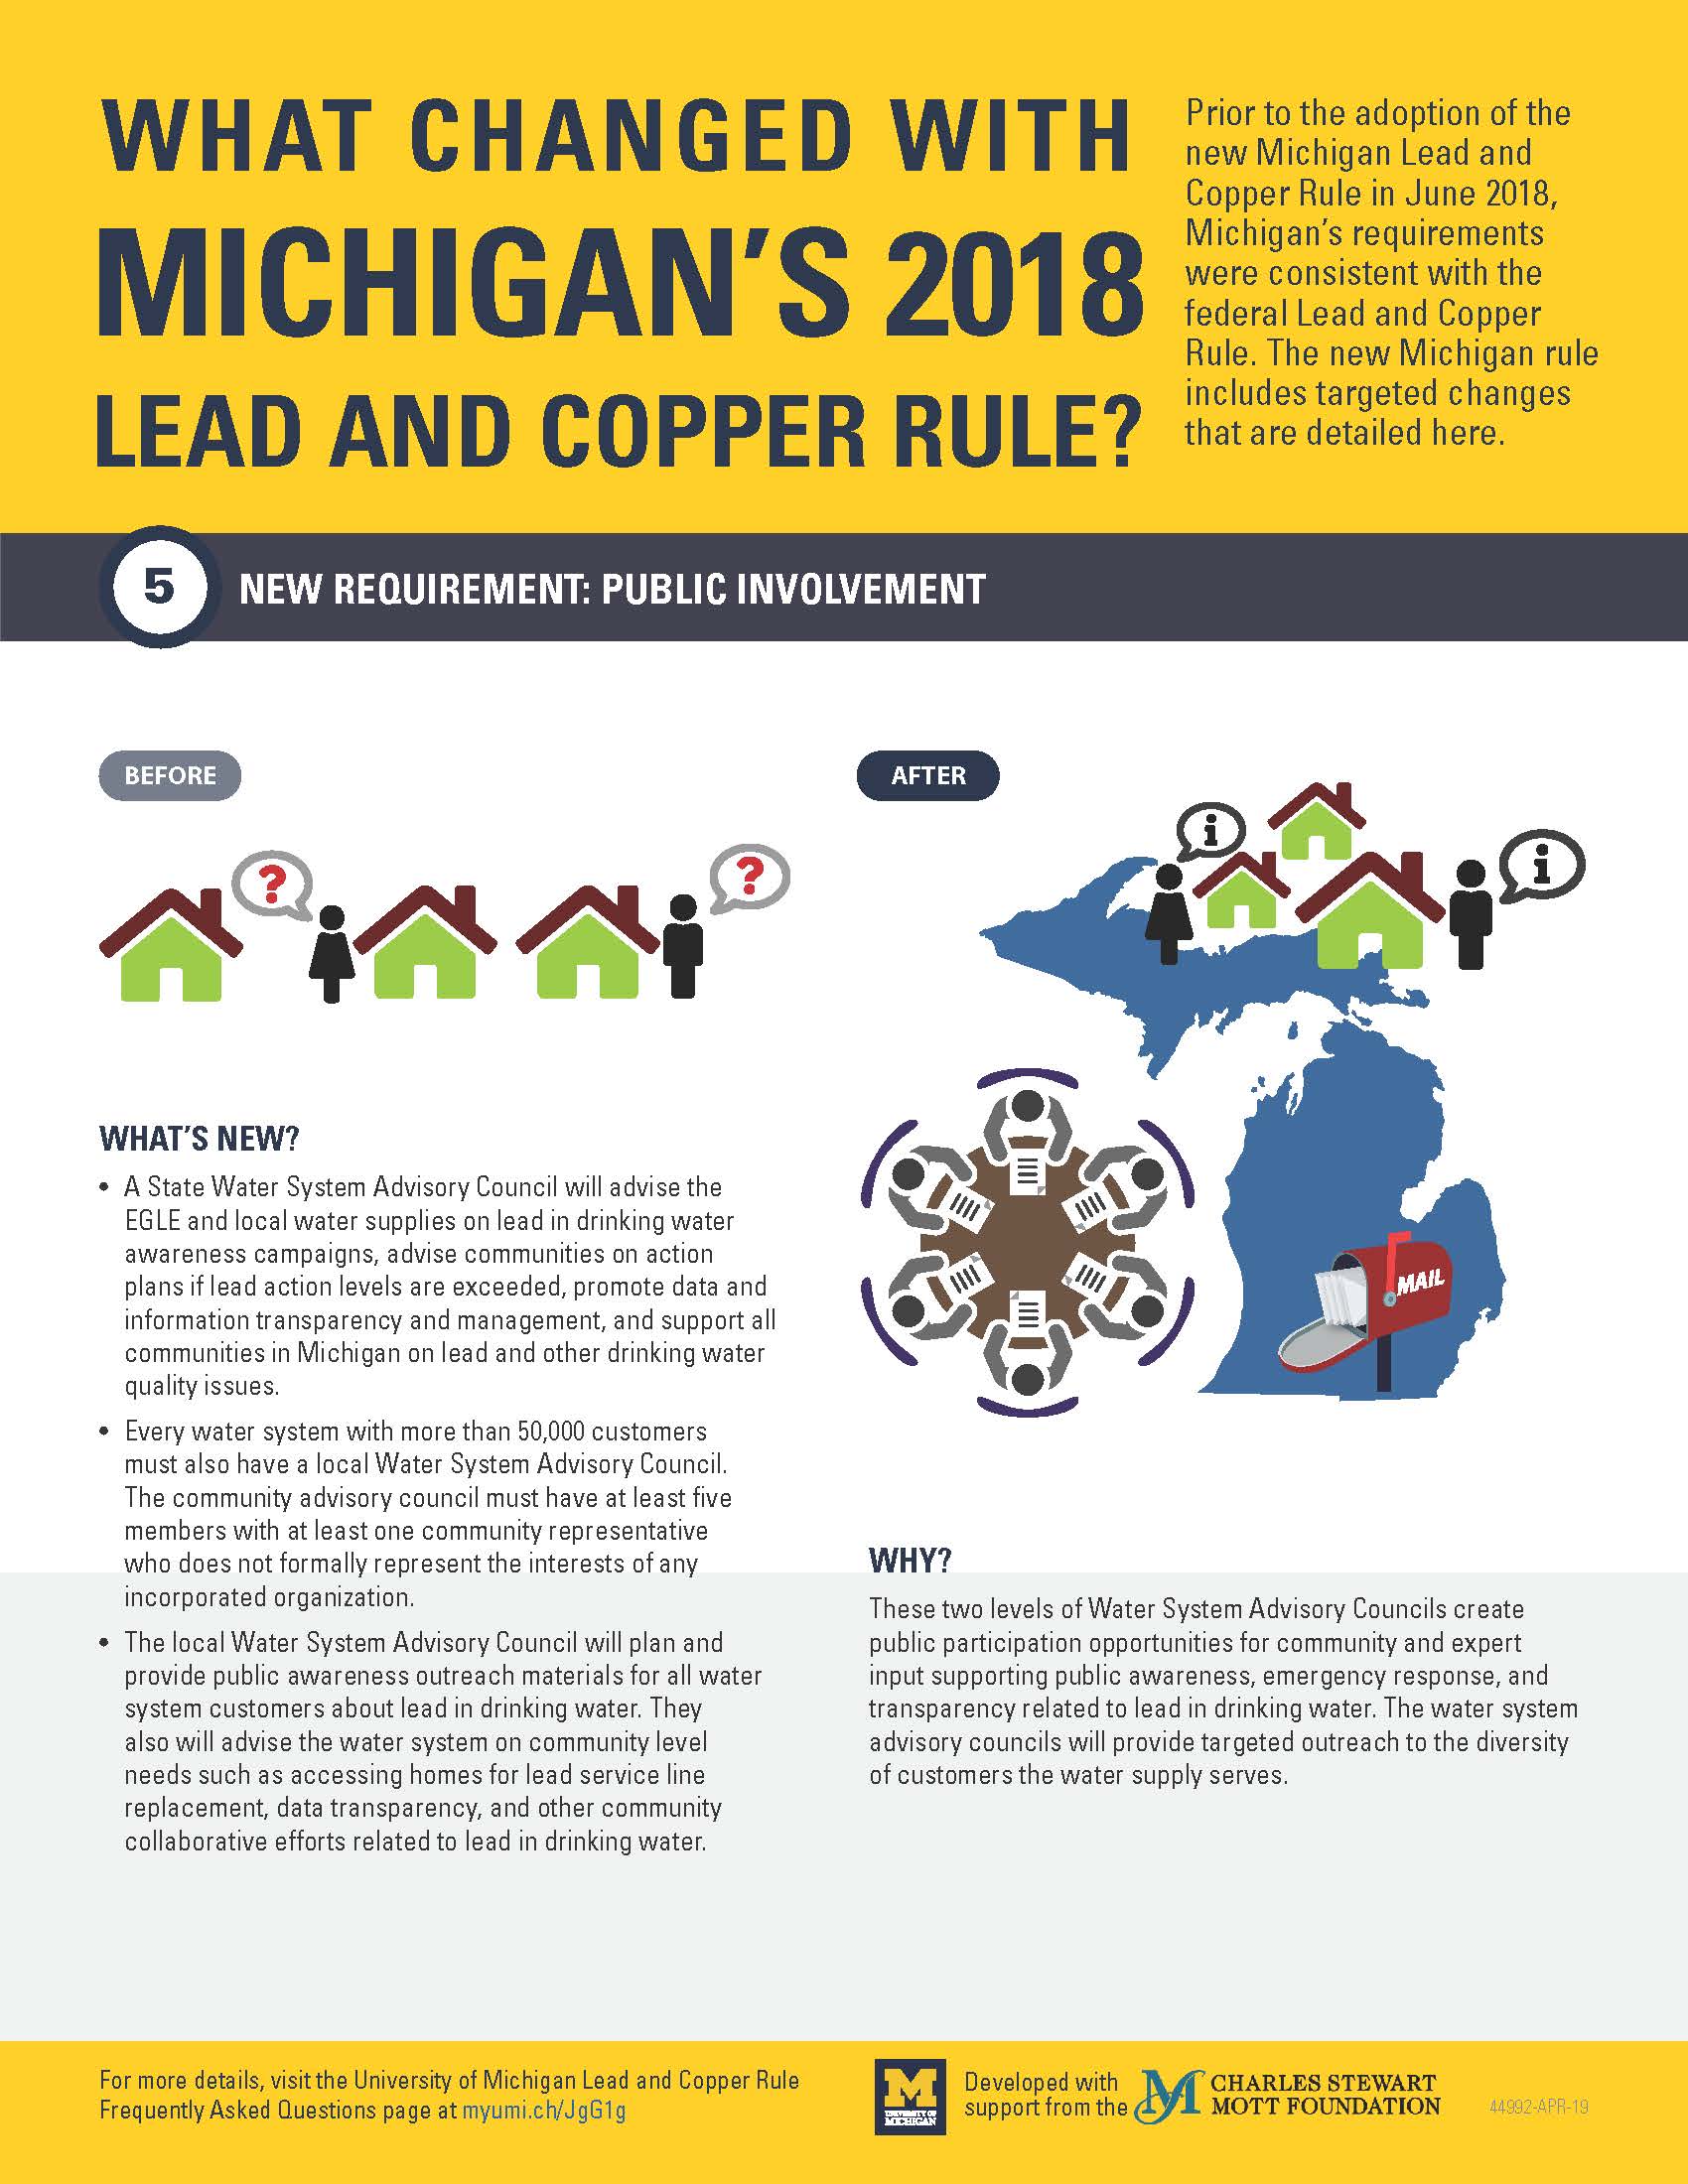 Infographic displaying information on Michigan's Lead and Copper Rule